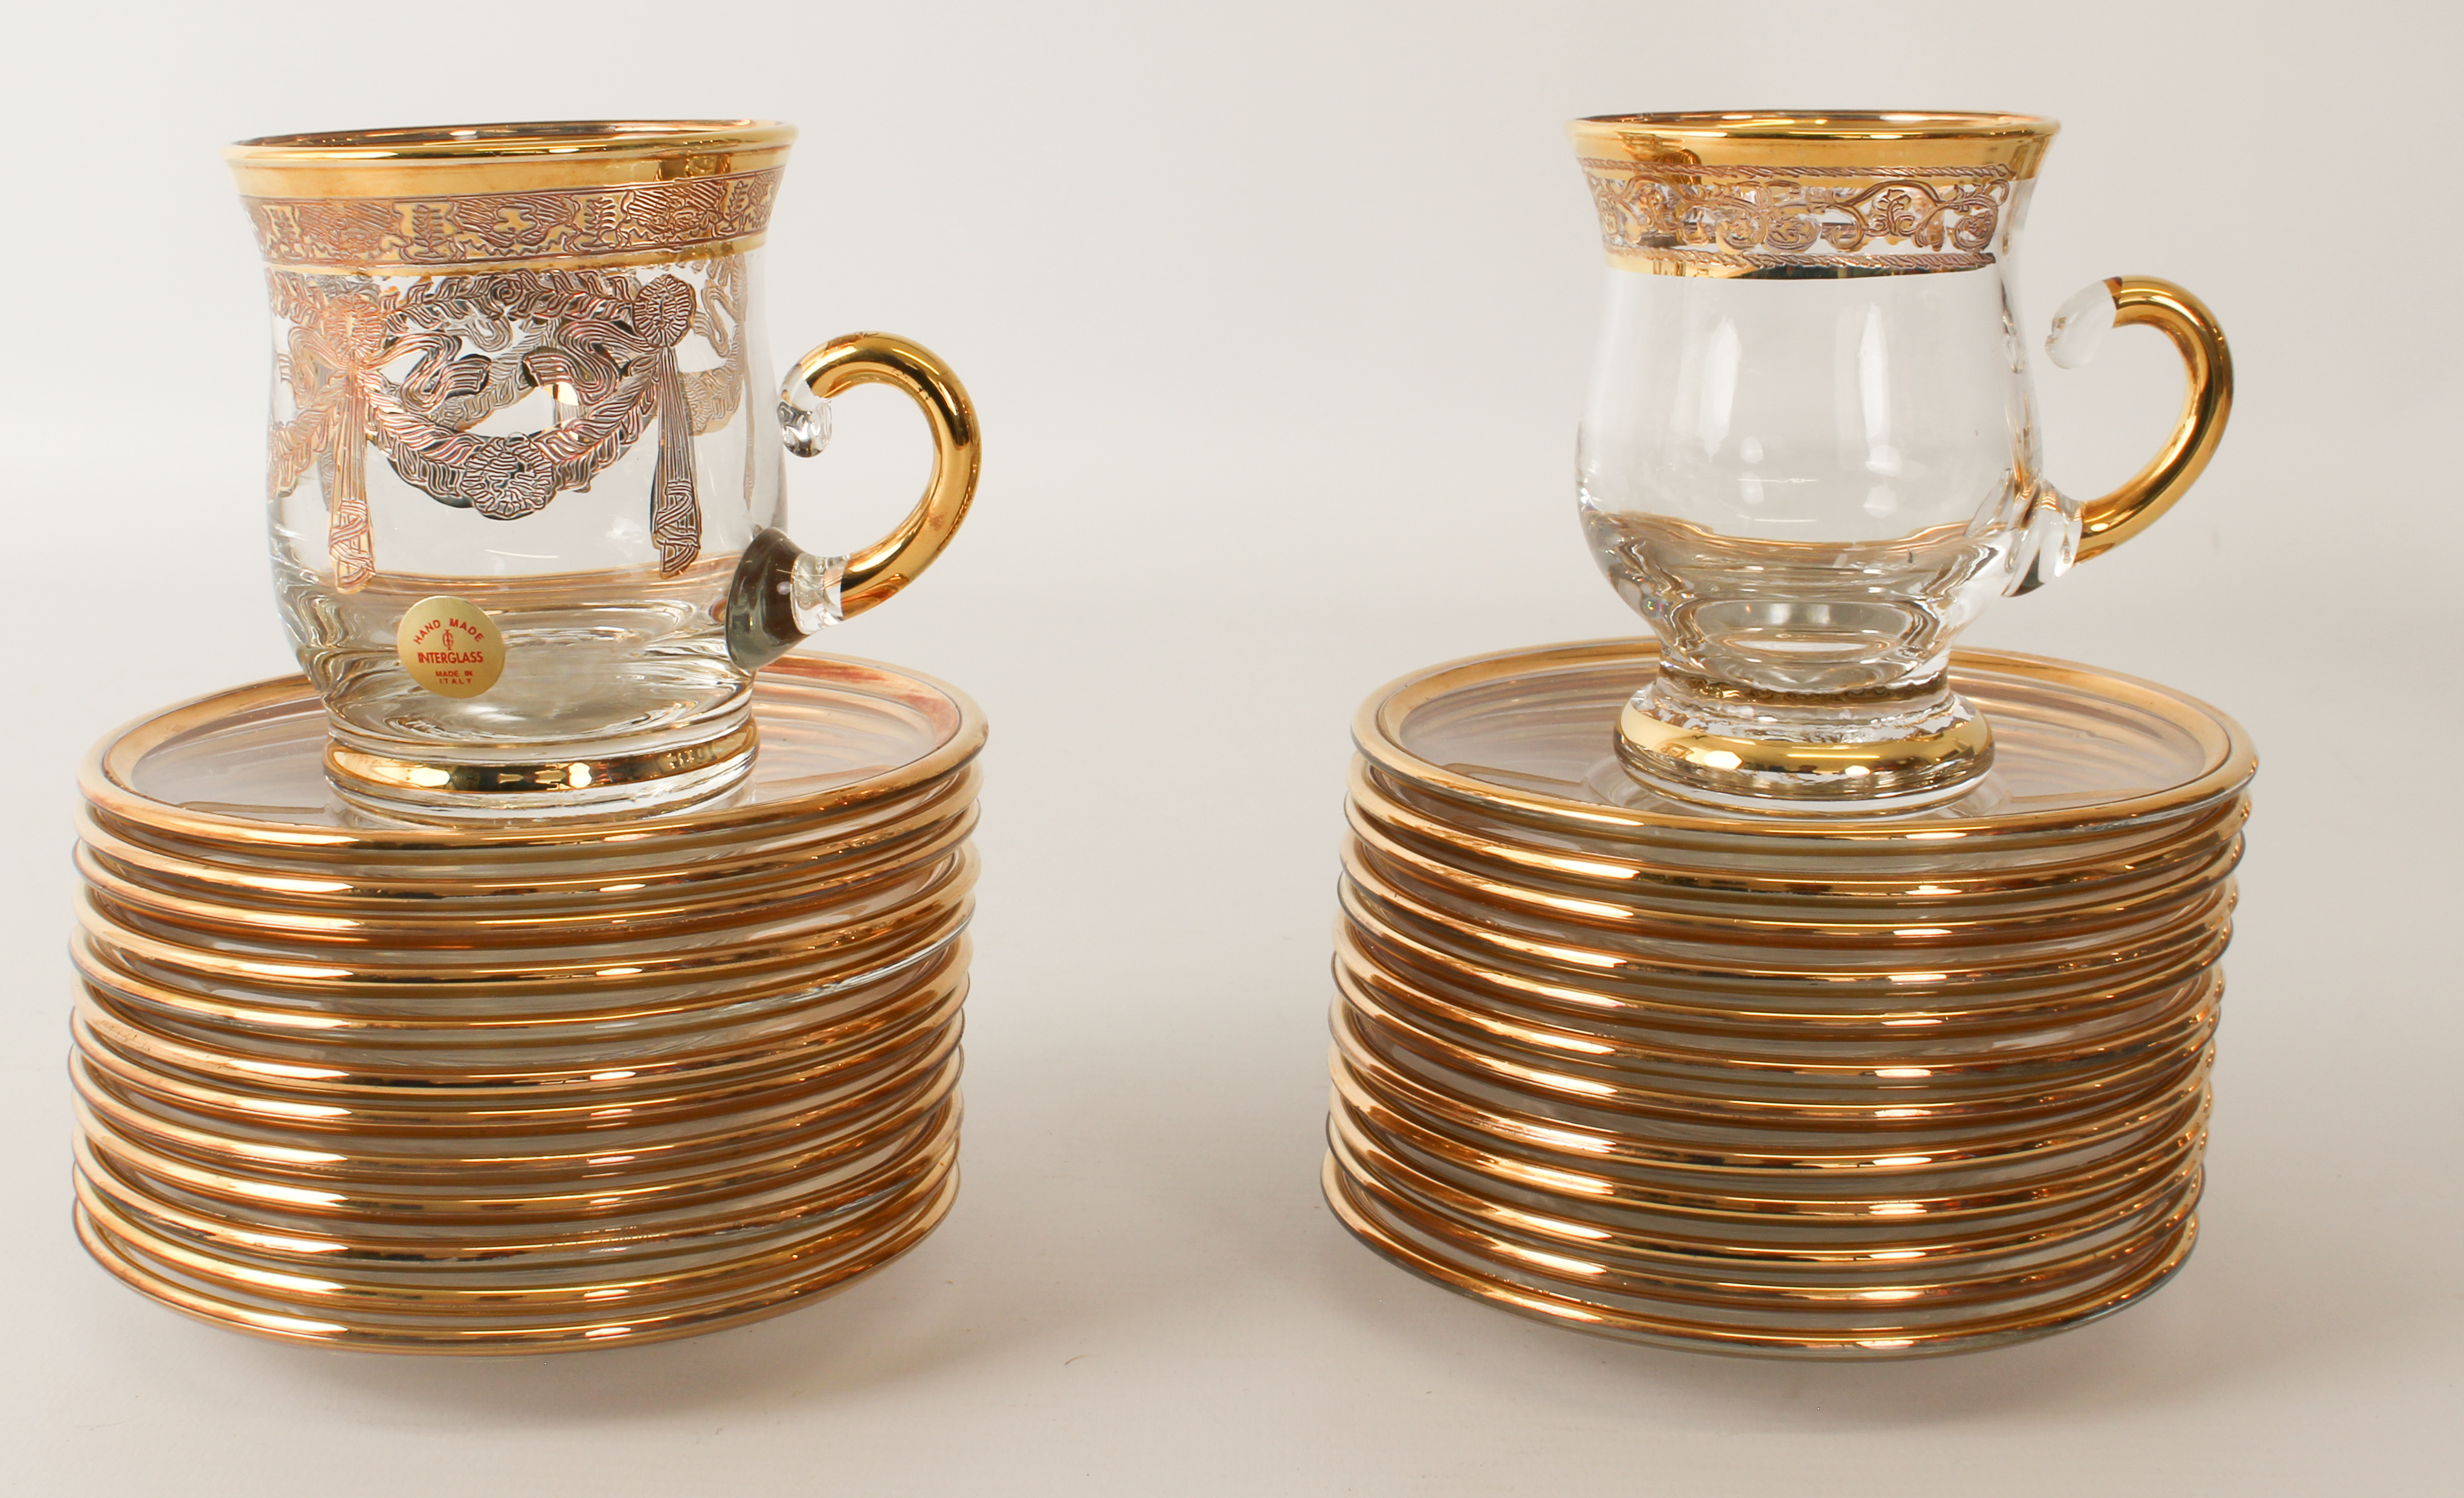 An Italian gilt-decorated glass tea and coffee service in the Florentine taste by Interglass and - Image 2 of 5